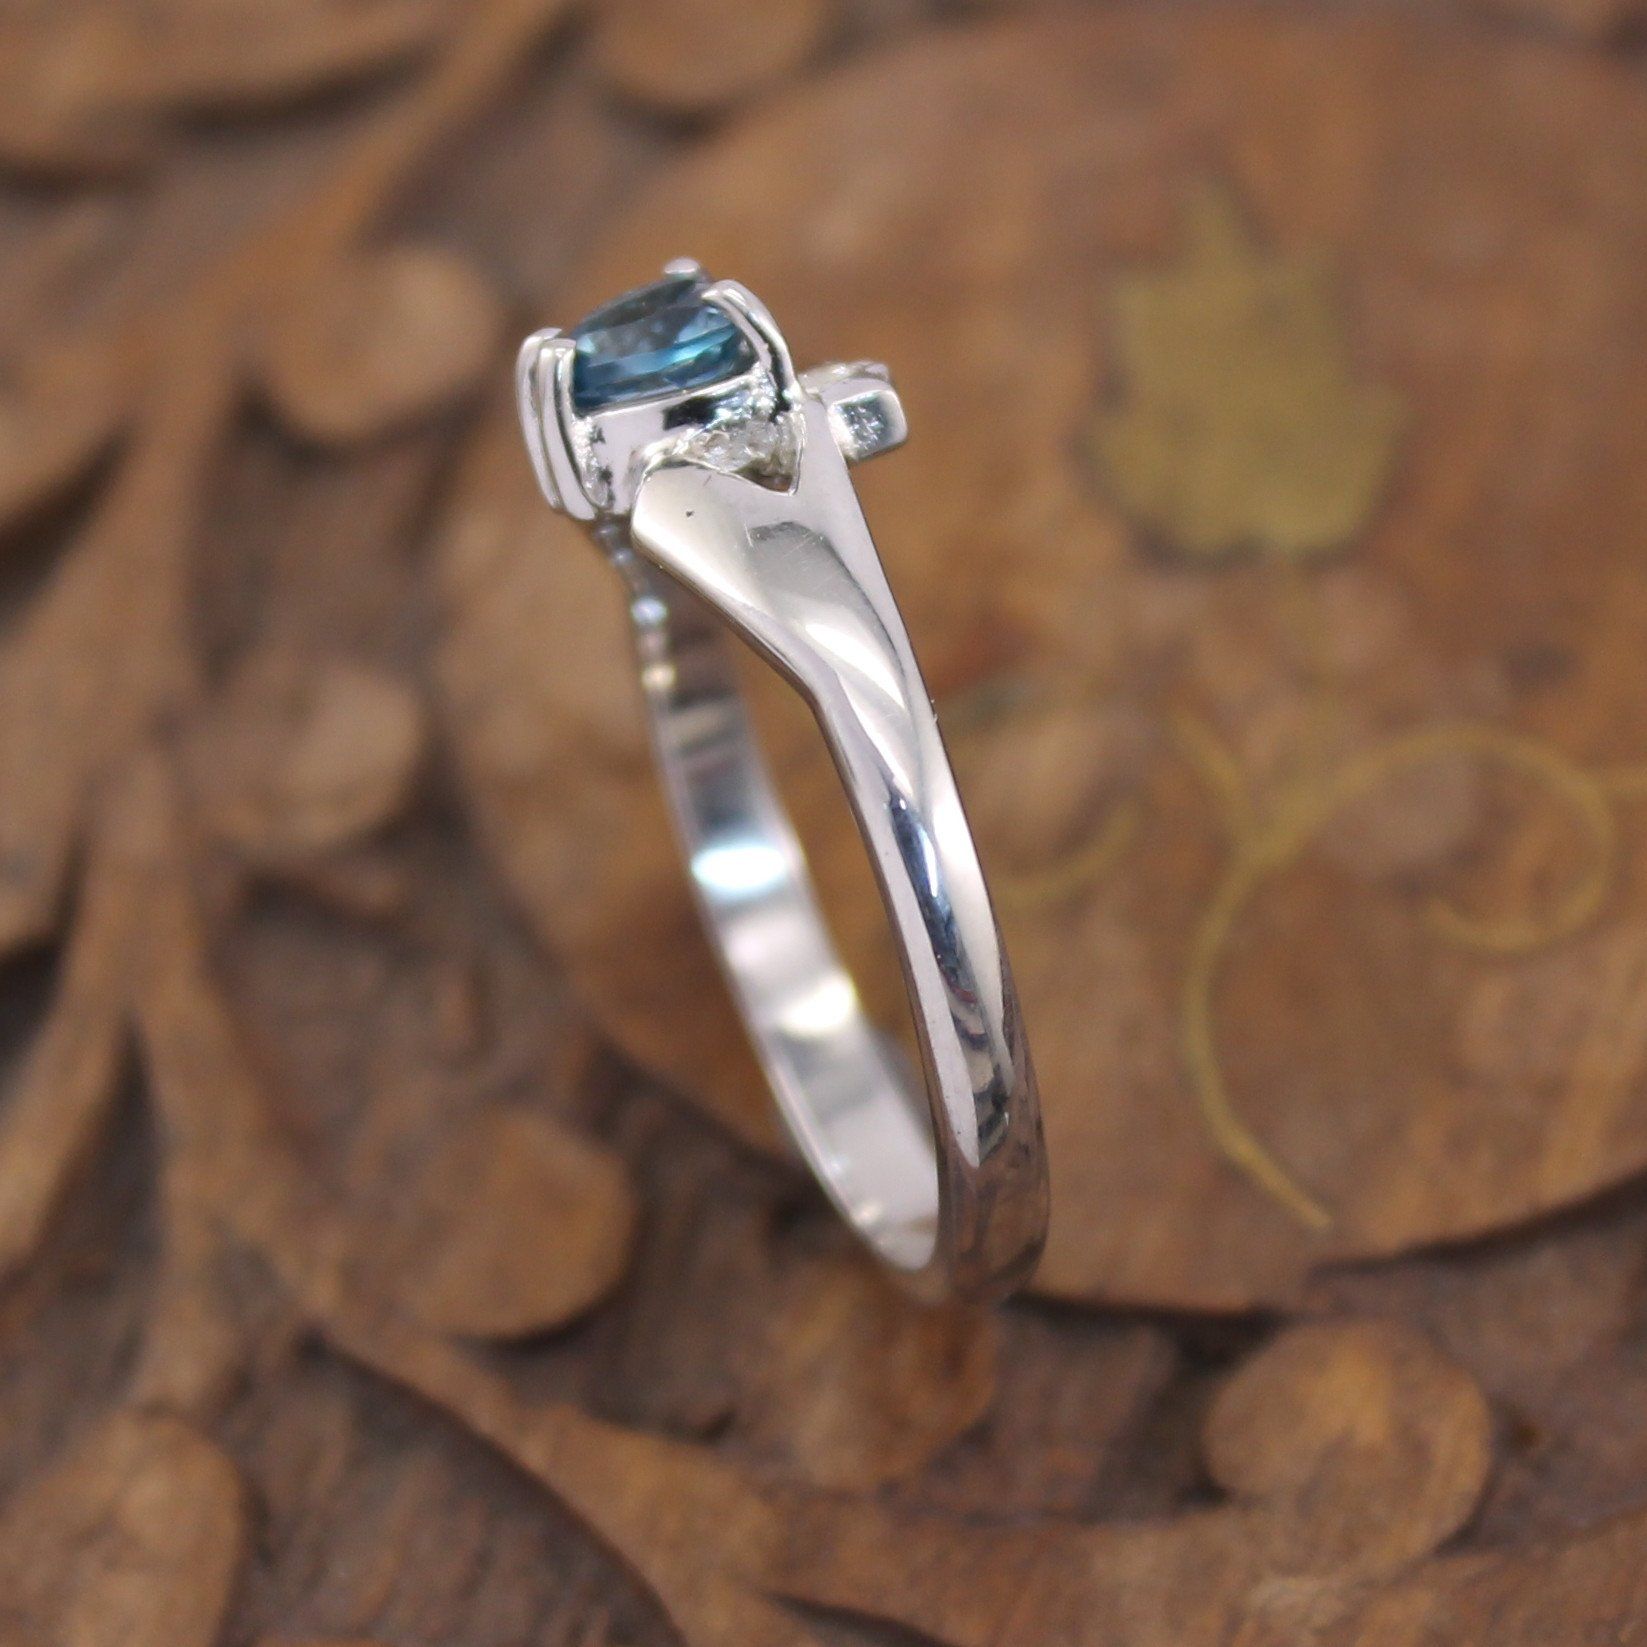 Jewelry - Claddagh Ring, Real Blue Topaz And Diamond Contemporary Claddagh Ring